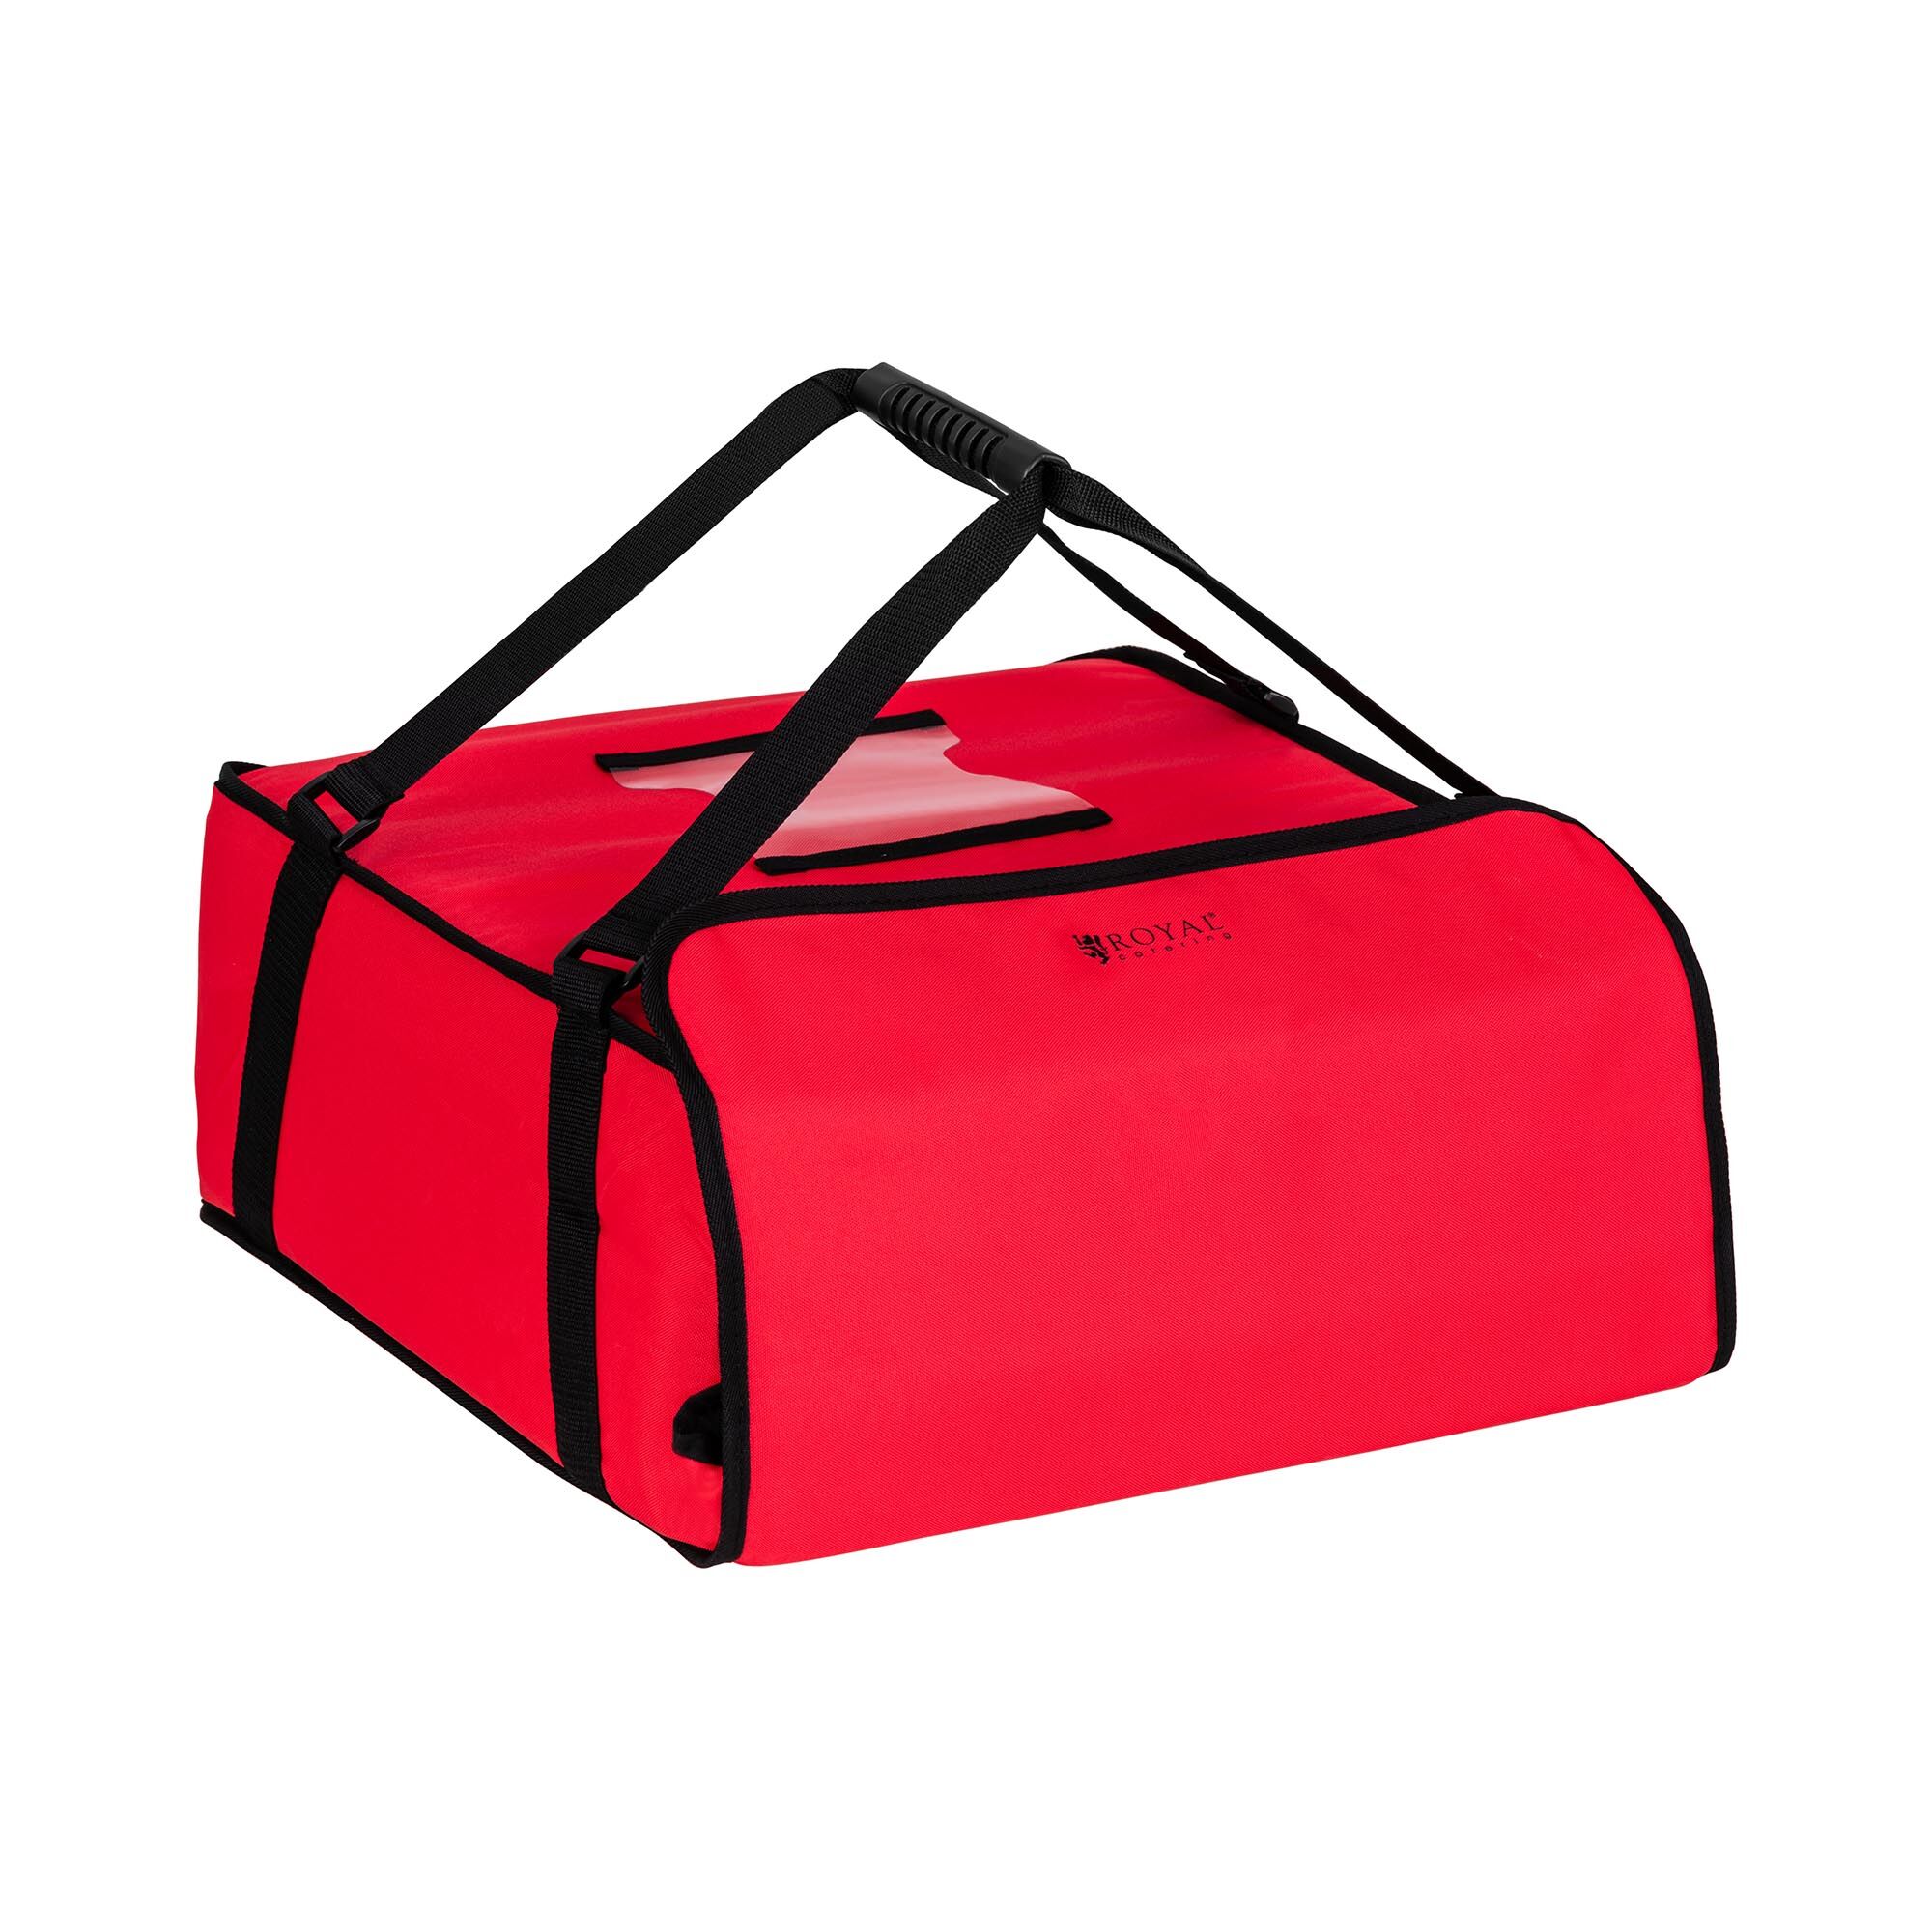 Royal Catering Pizzaliefertasche - 45 x 45 cm